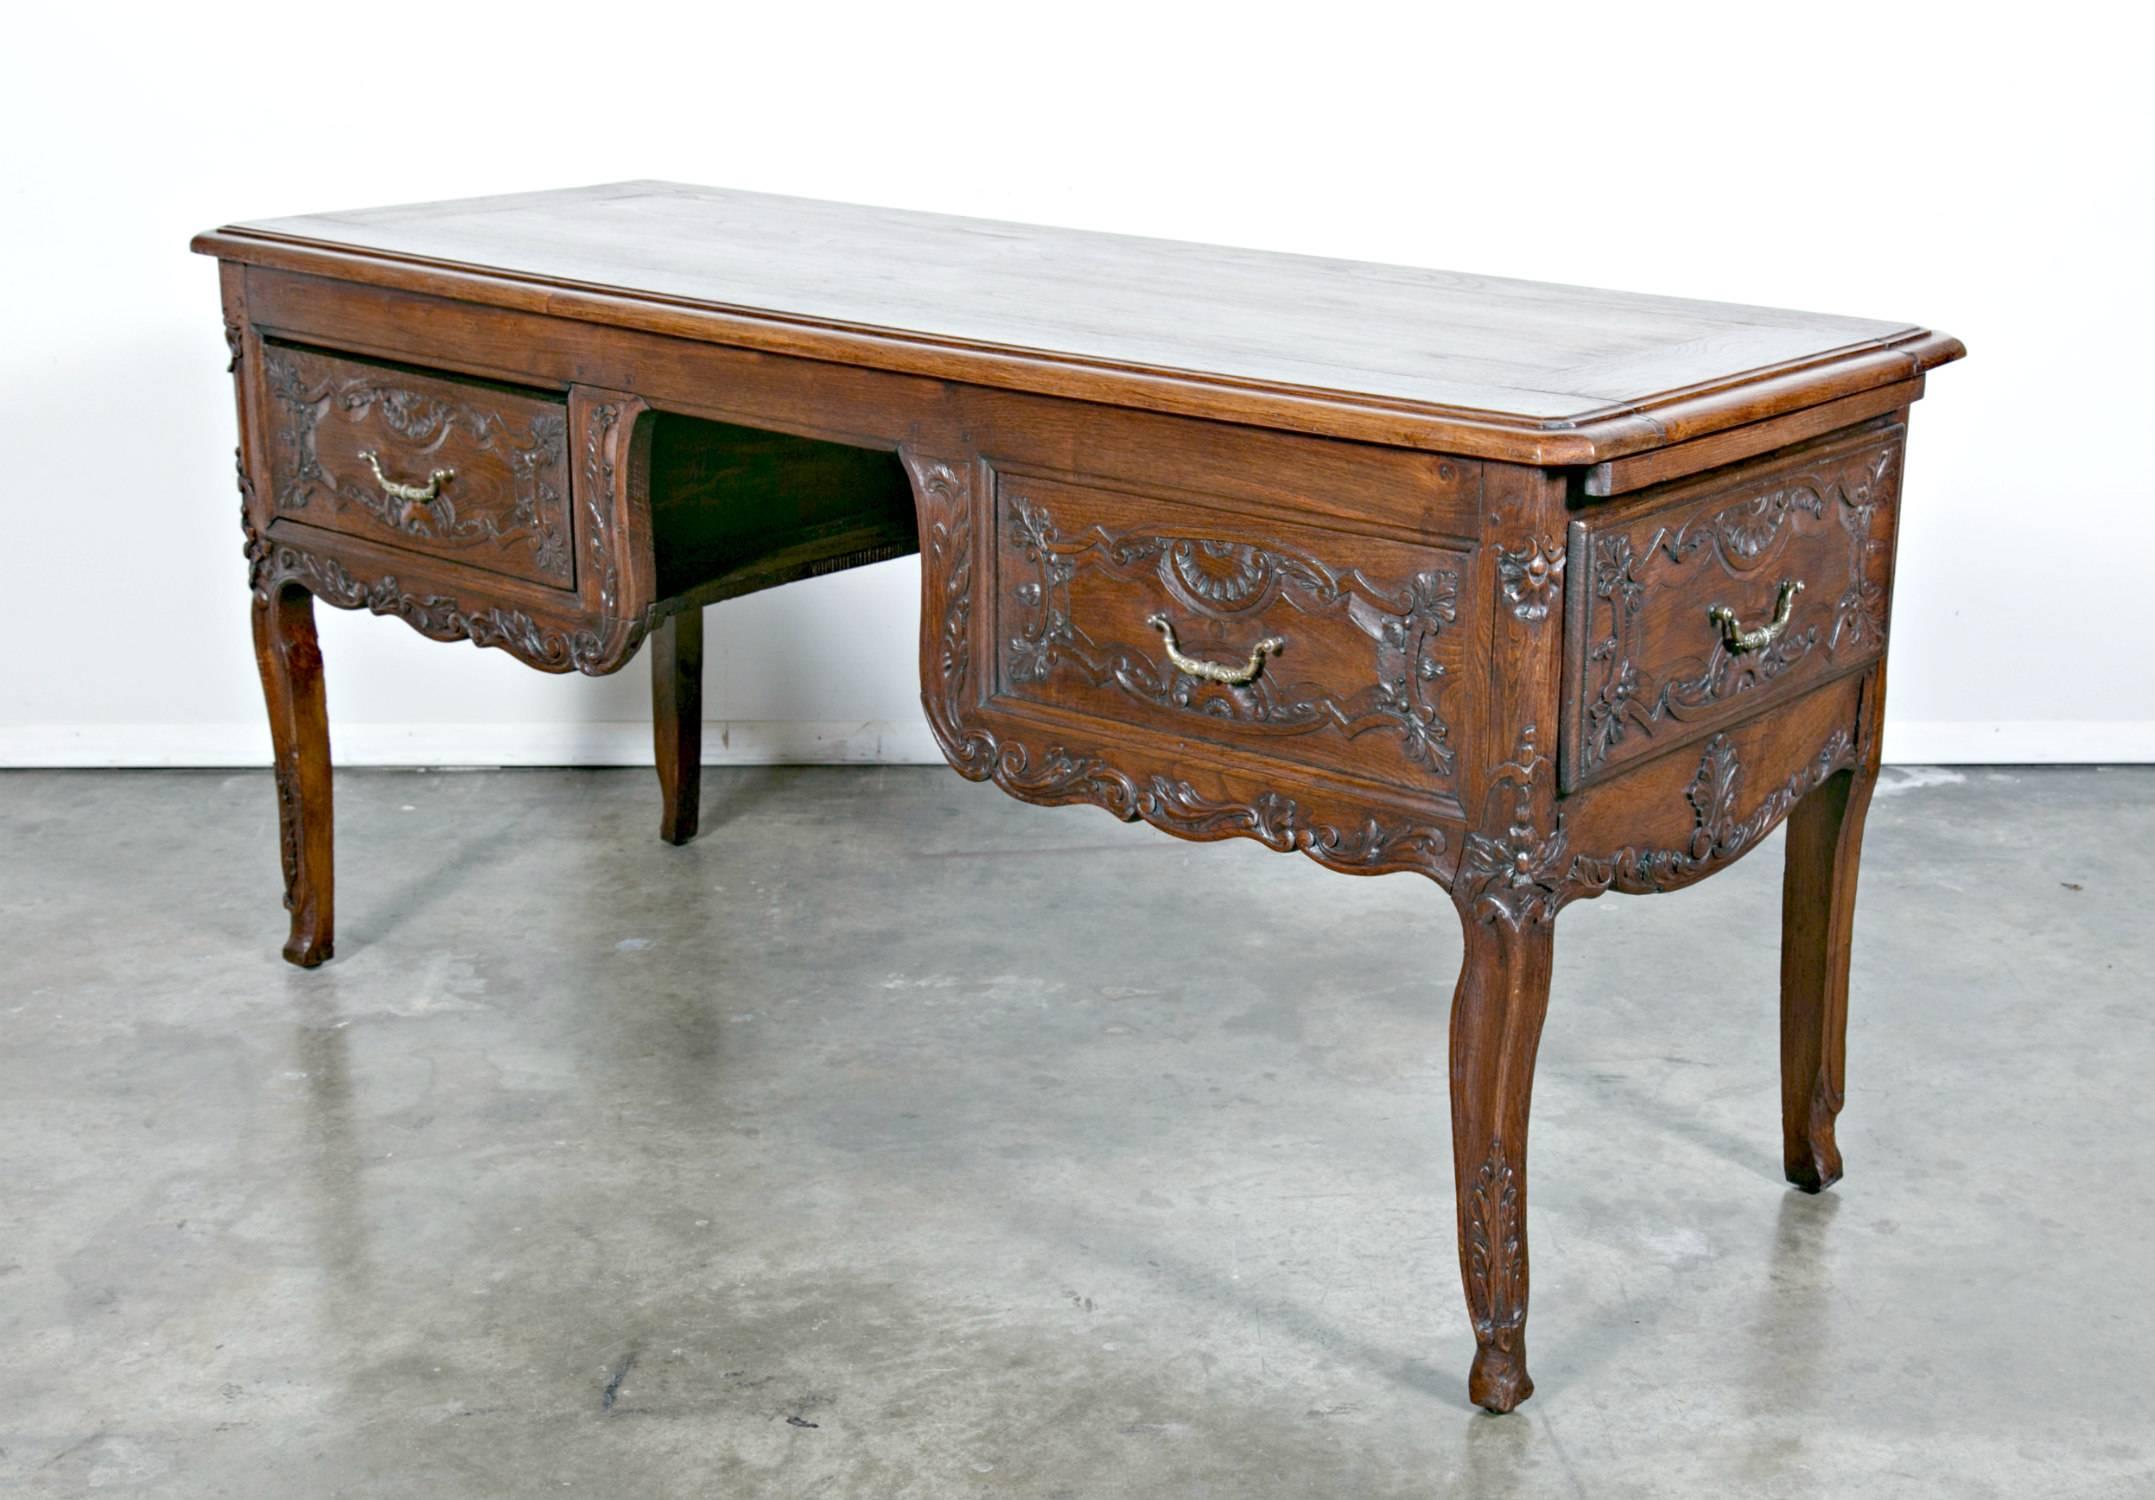 An early and very well crafted Louis XV style floating bureau plat, this fine writing desk is likely a product of the first quarter of the 19th century, perhaps a little earlier. Hand-carved with Regence-inspired artistry from solid French chestnut,